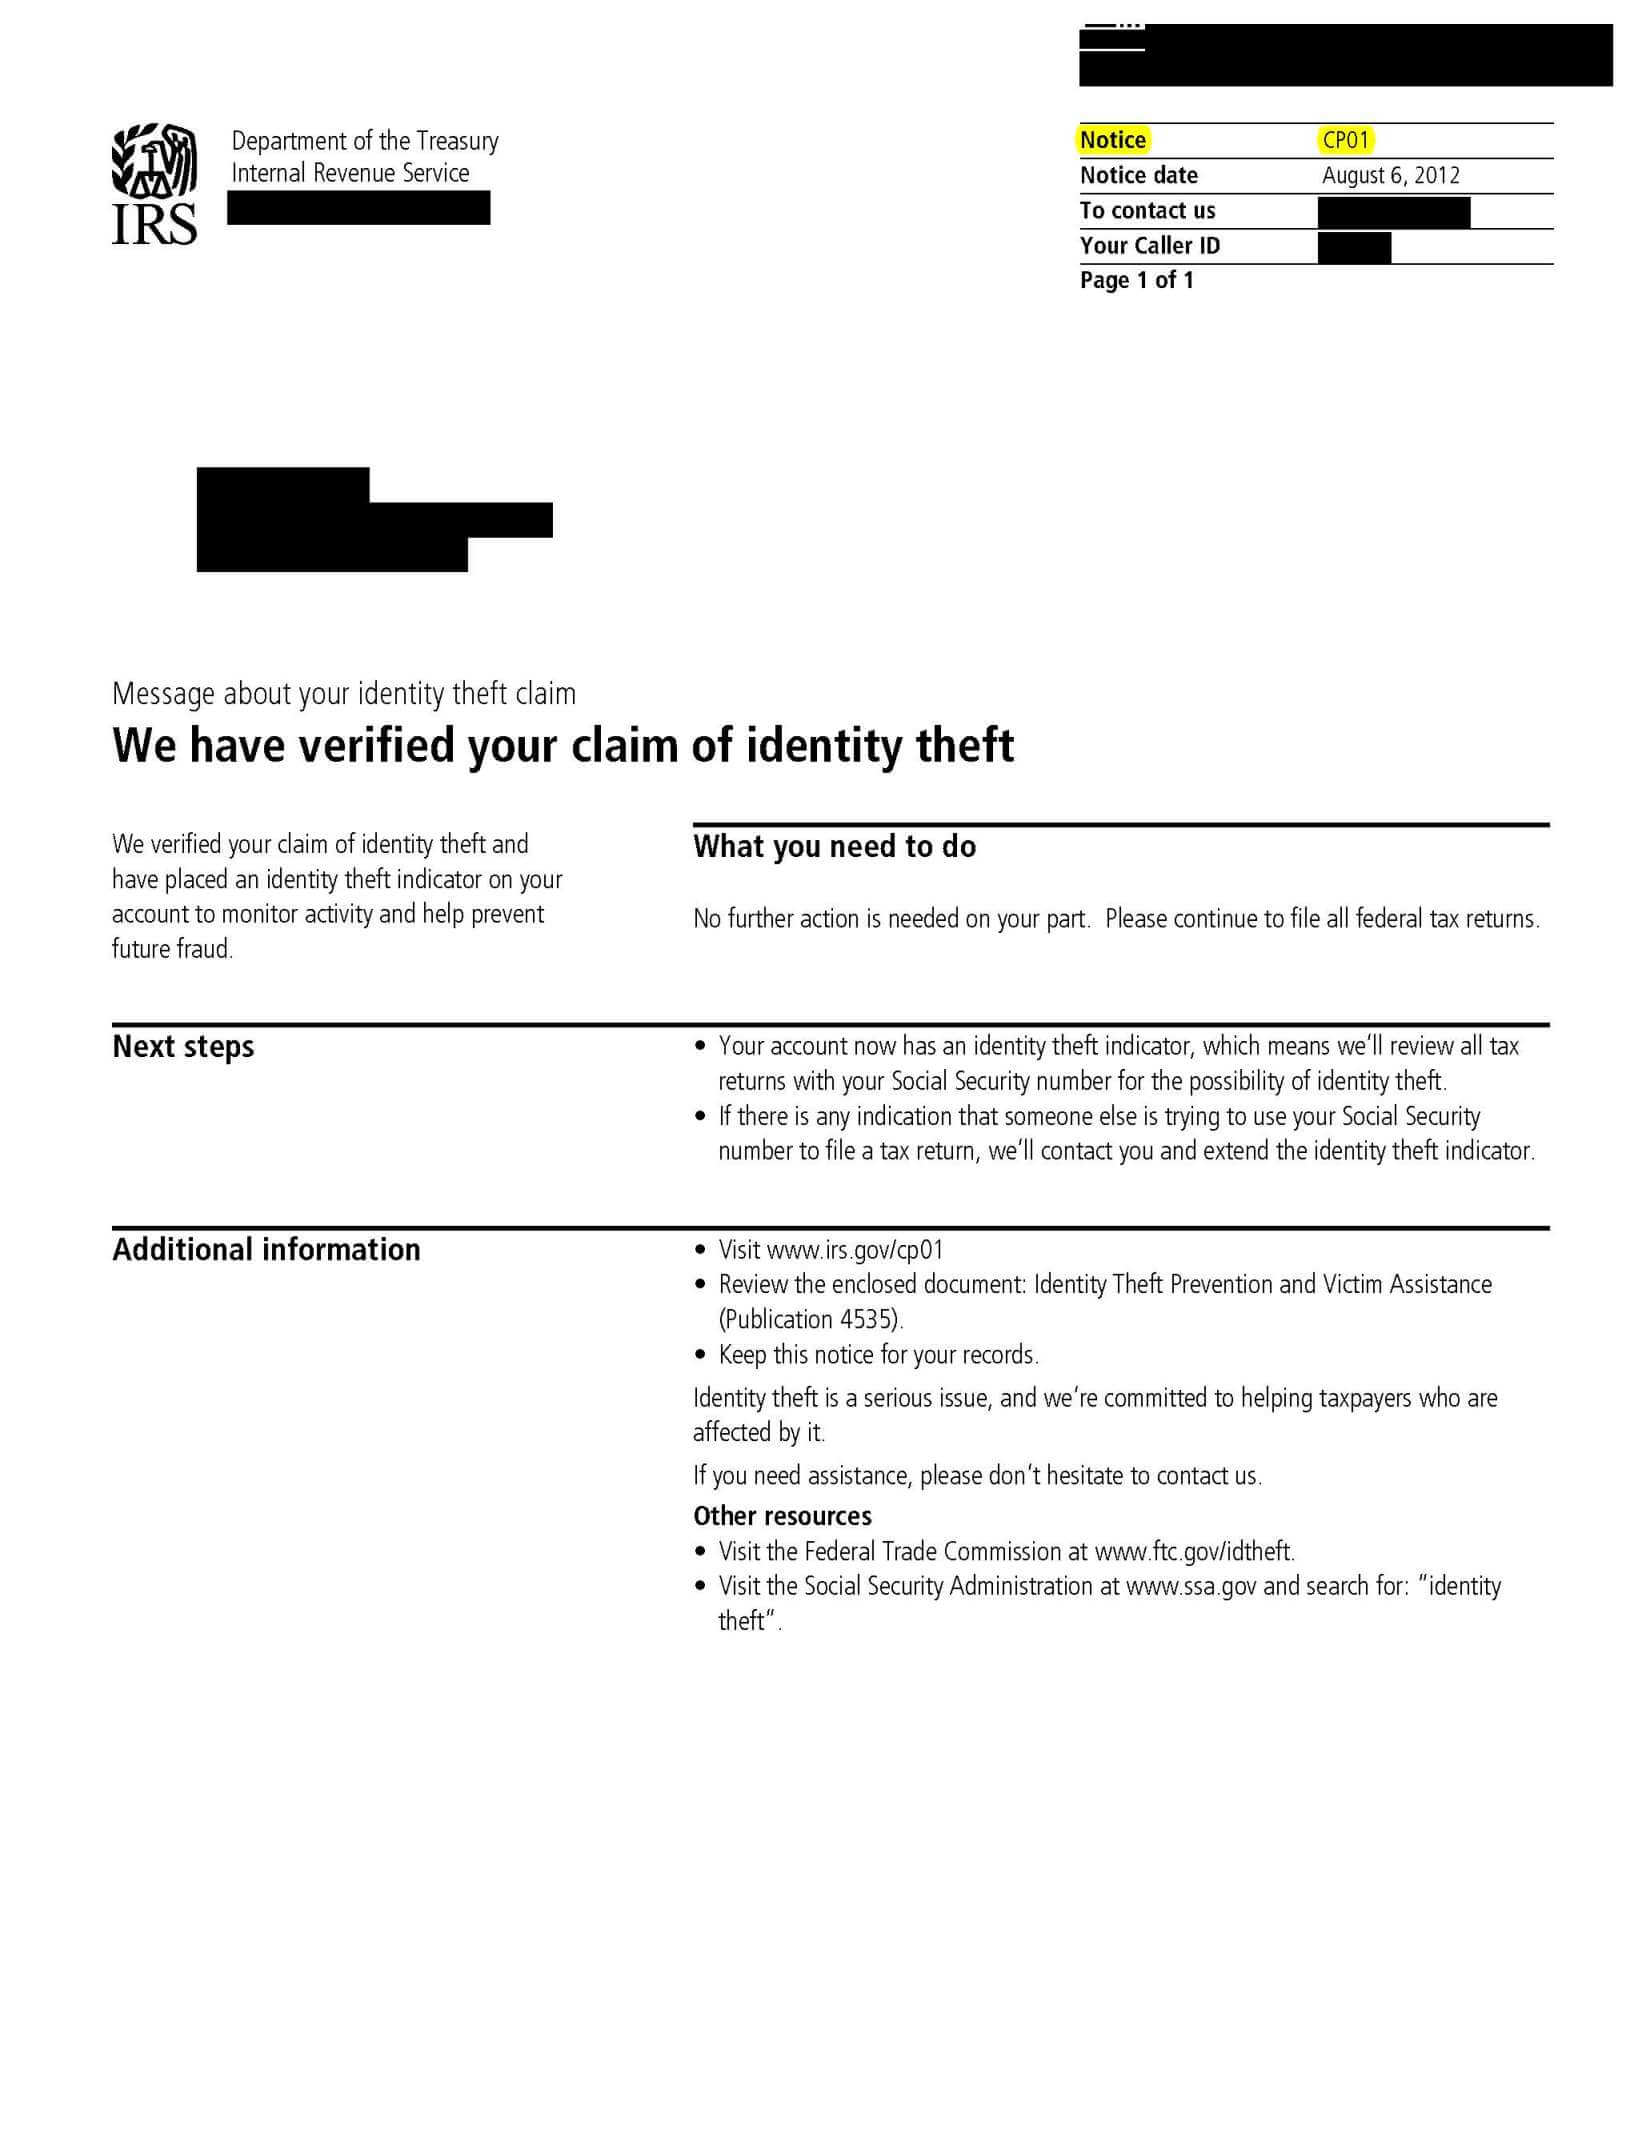 www.irs.gov/cp01 - IRS Notice CP01 concerning identity theft